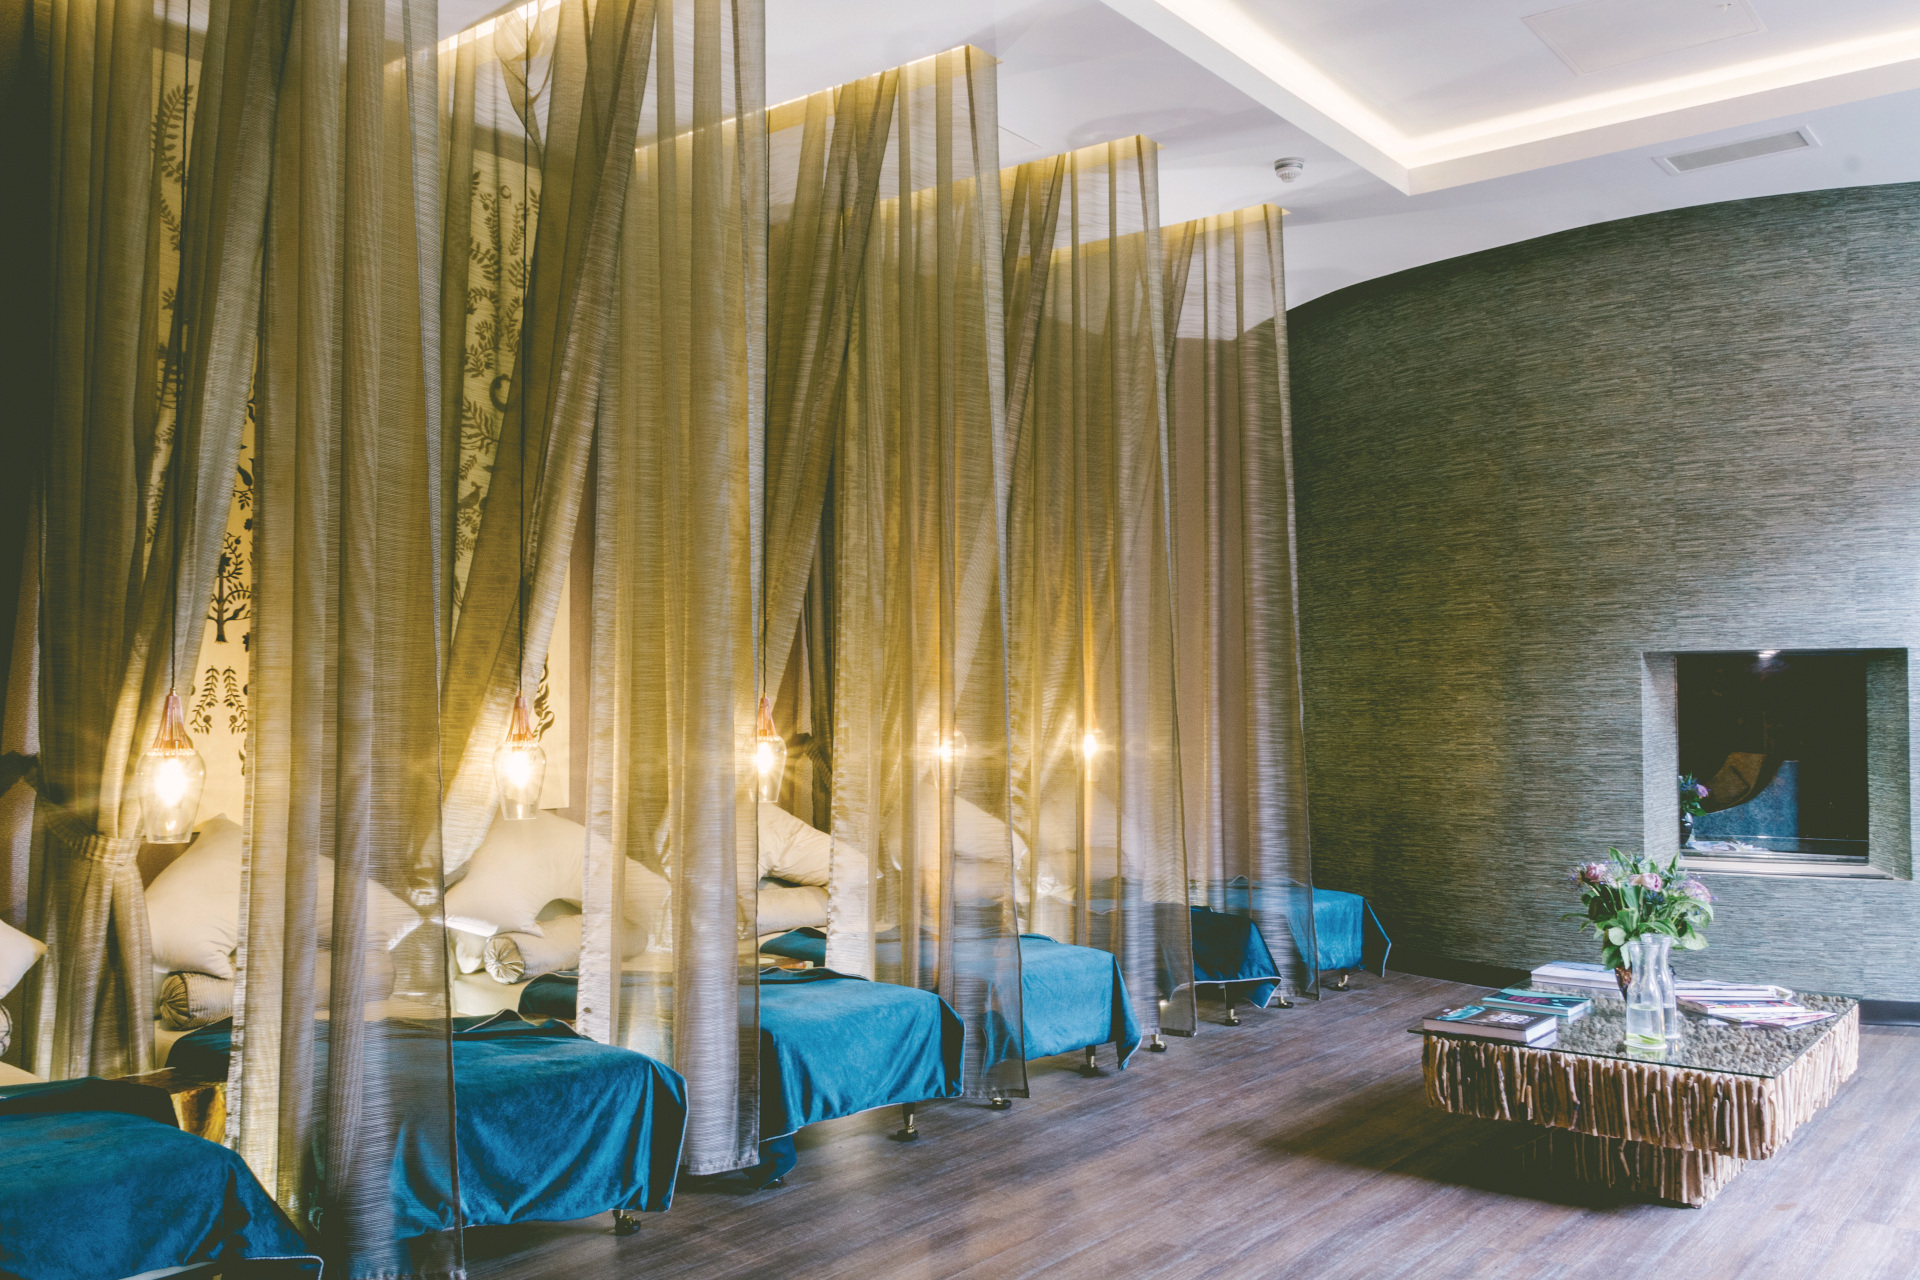 Spa relaxation room with gauze curtains and blue beds